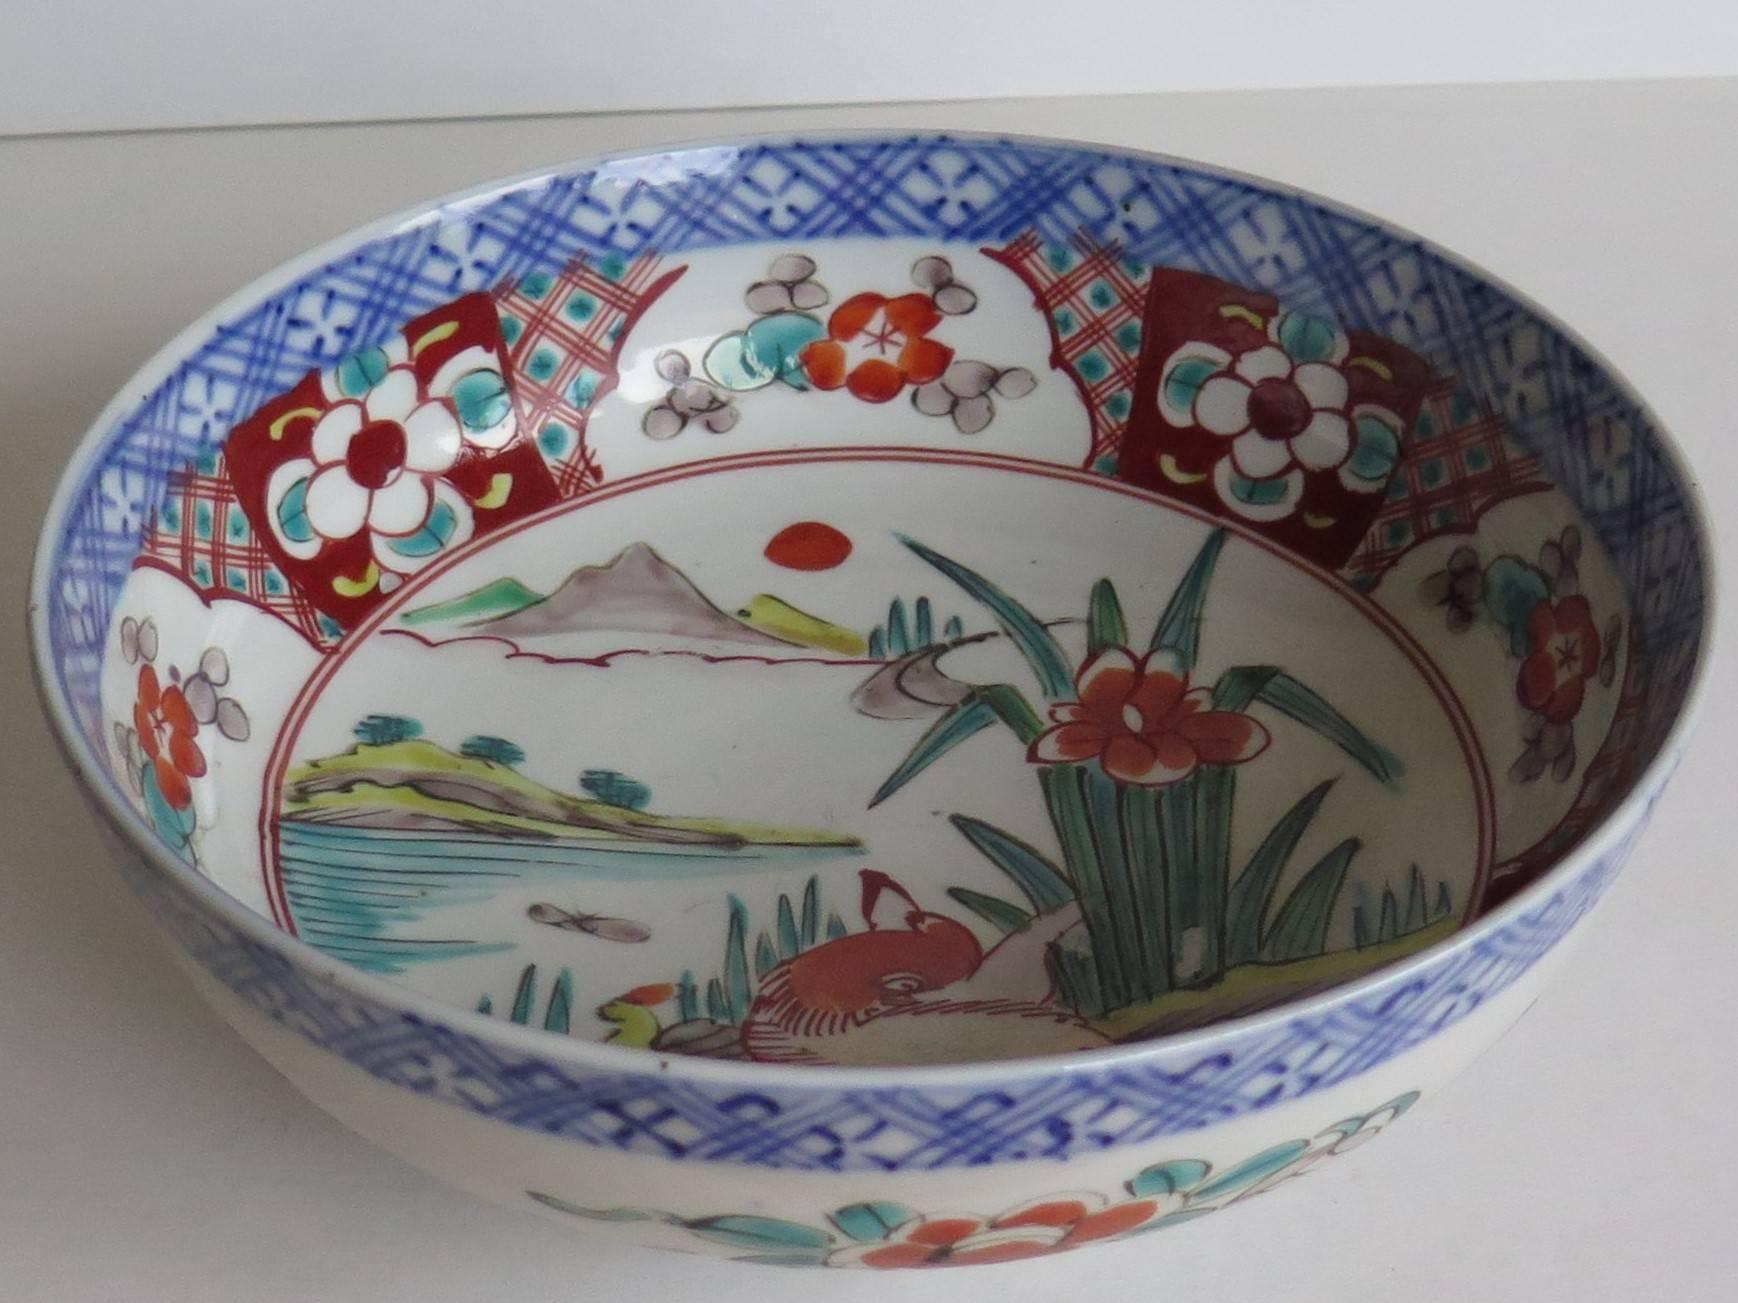 This is a good and very decorative porcelain footed bowl, hand-painted in polychrome enamels and dating to the later part of the 19th century, circa 1870, Meiji period.

The bowl is circular and well hand potted on a fairly deep foot.

This bowl